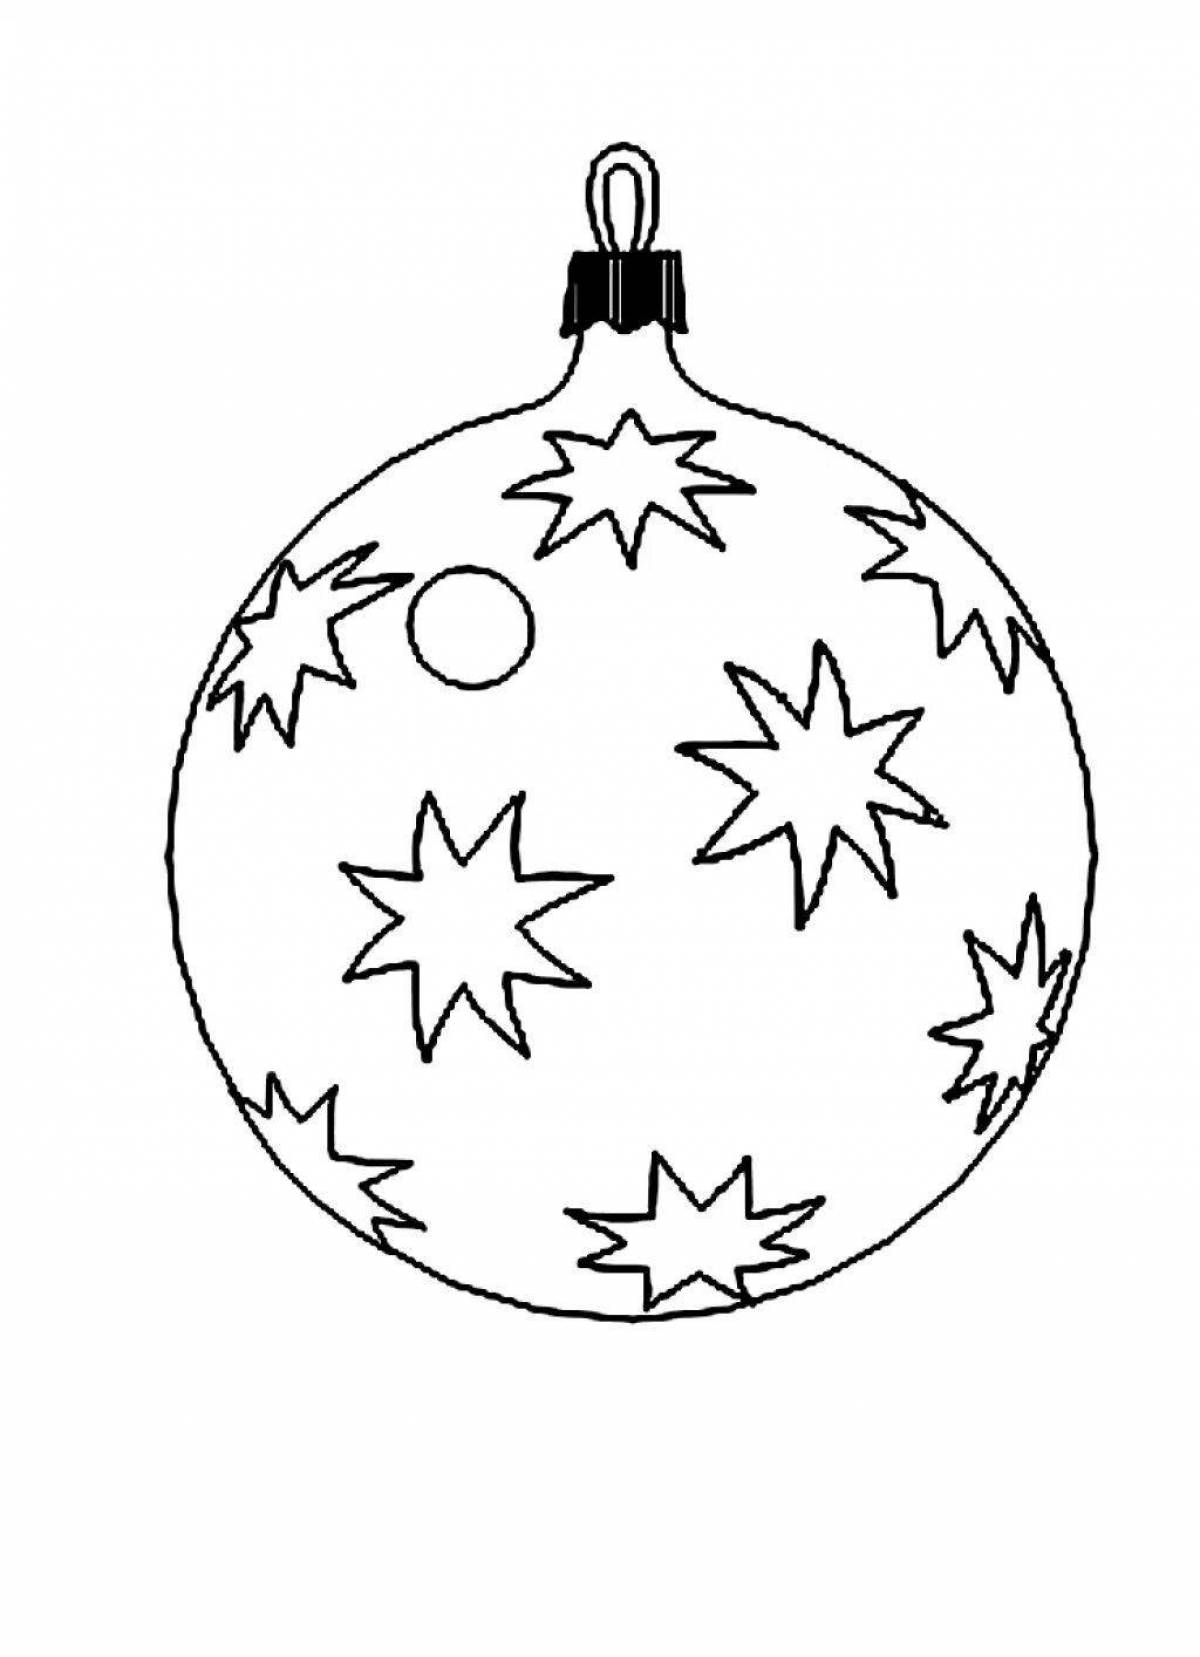 Glamorous Christmas toy ball coloring page